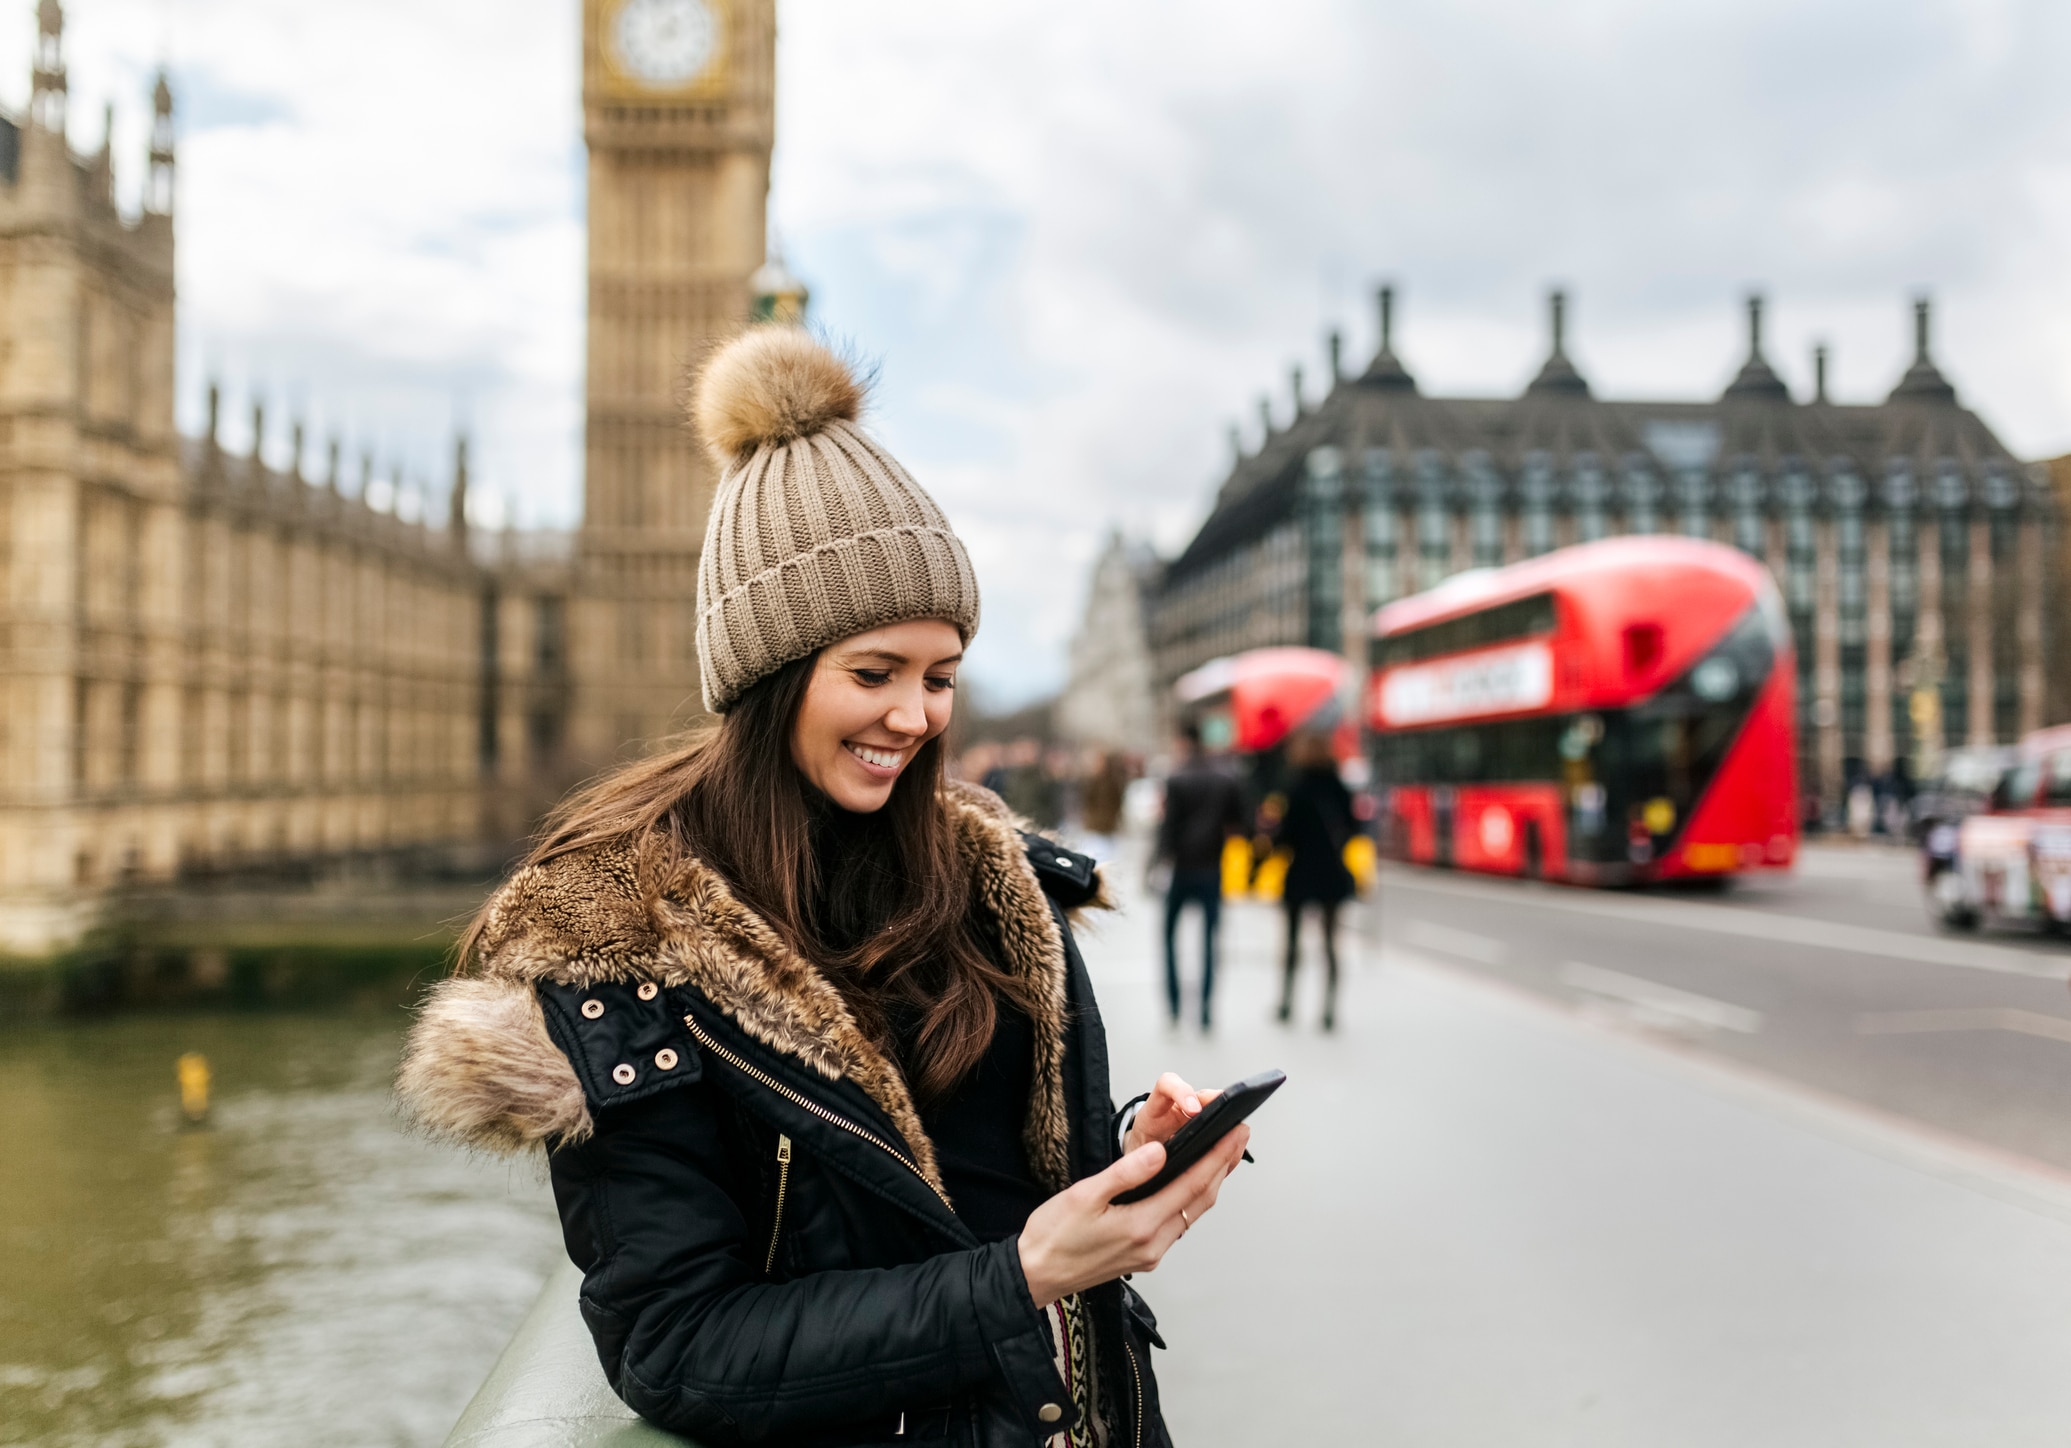 German network operators are giving up roaming costs in Great Britain